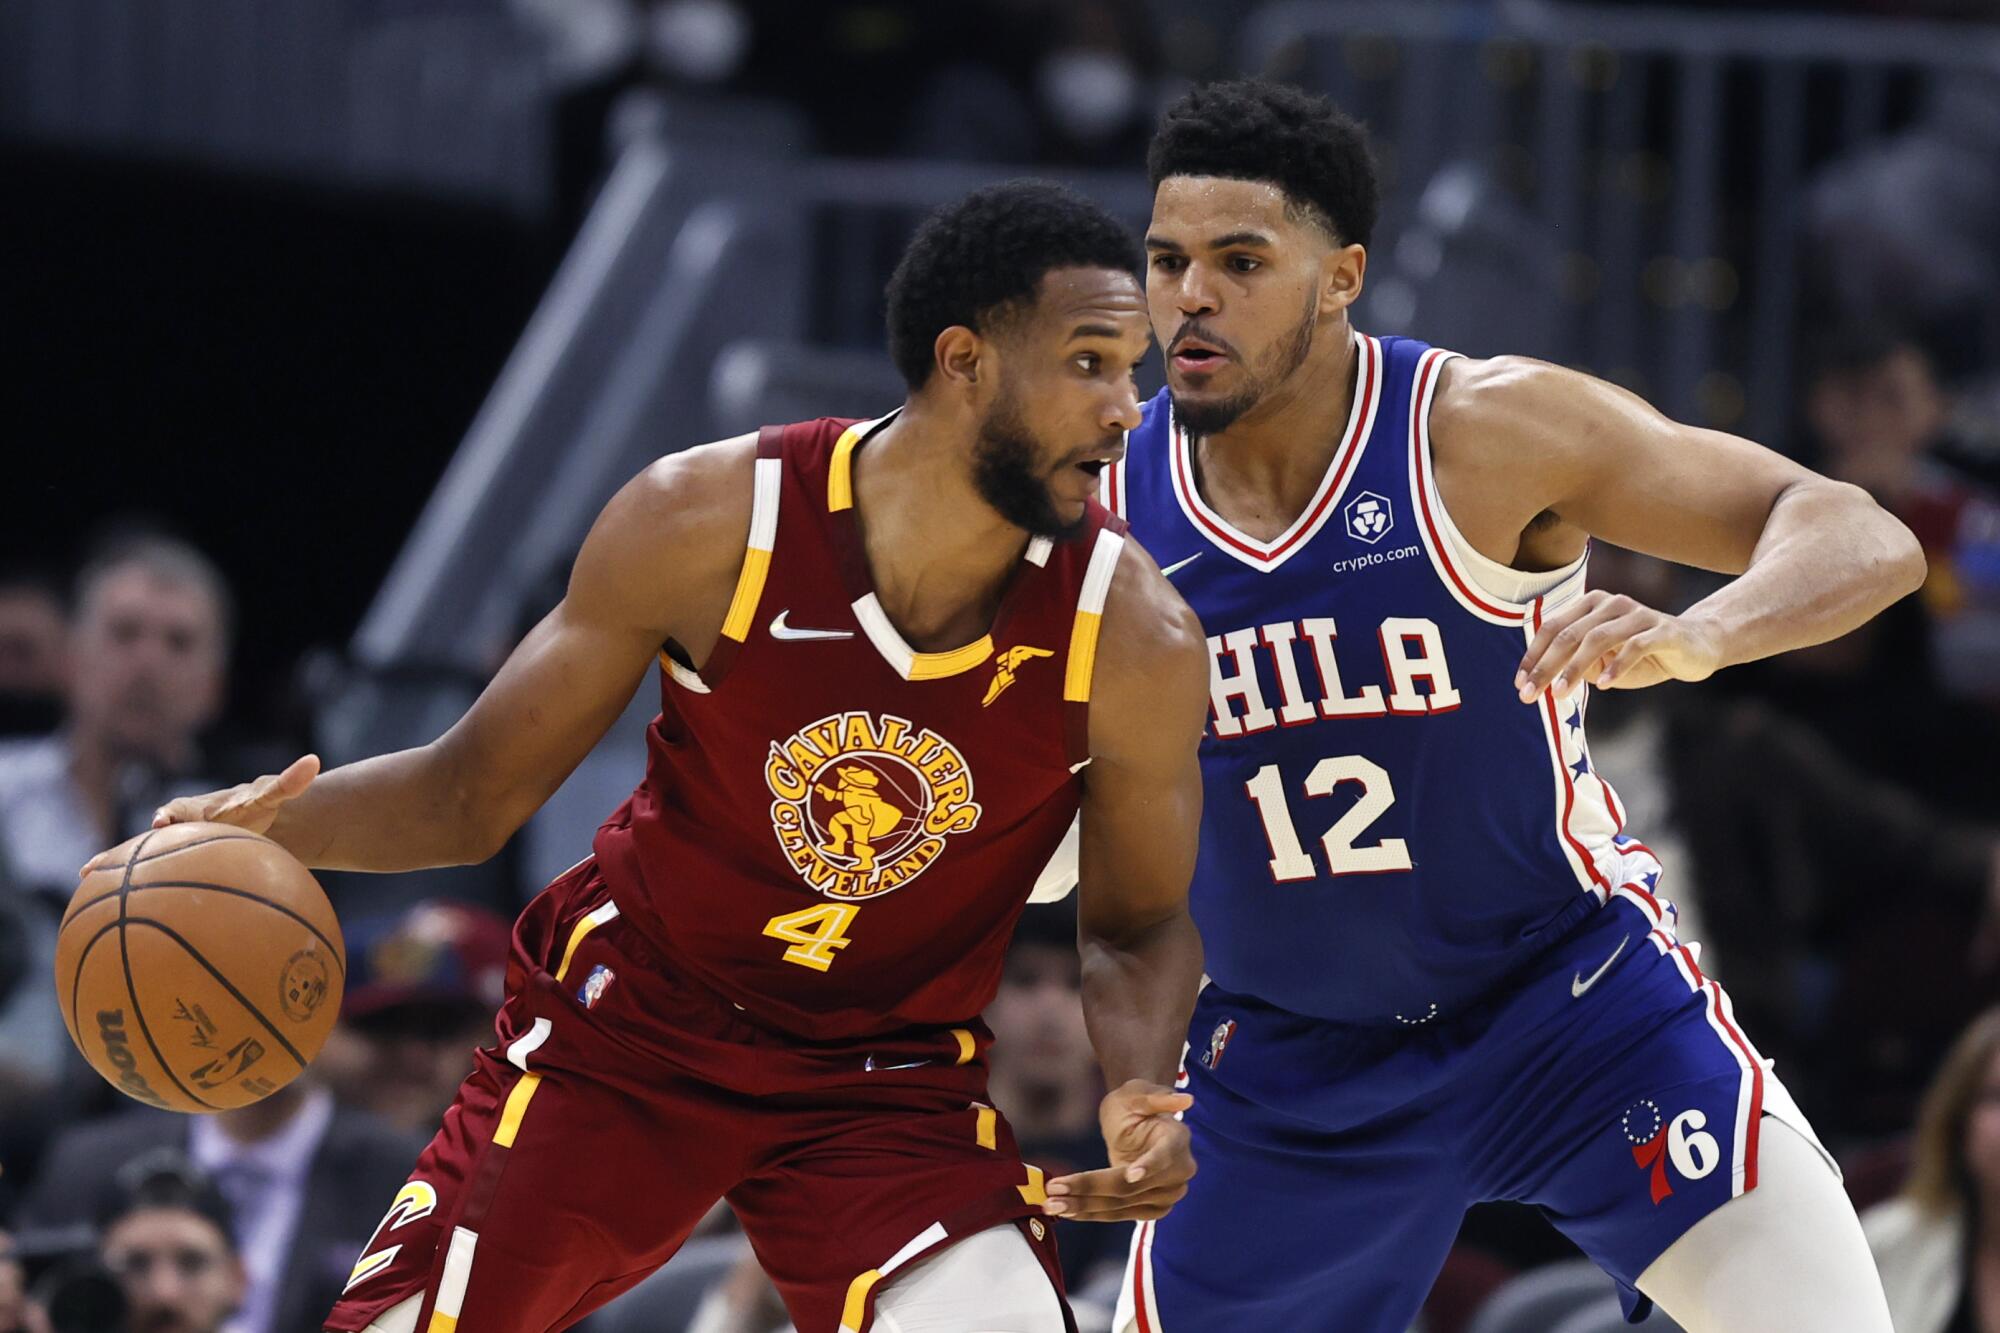 Cavaliers forward Evan Mobley is defended by 76ers forward Tobias Harris in the post.